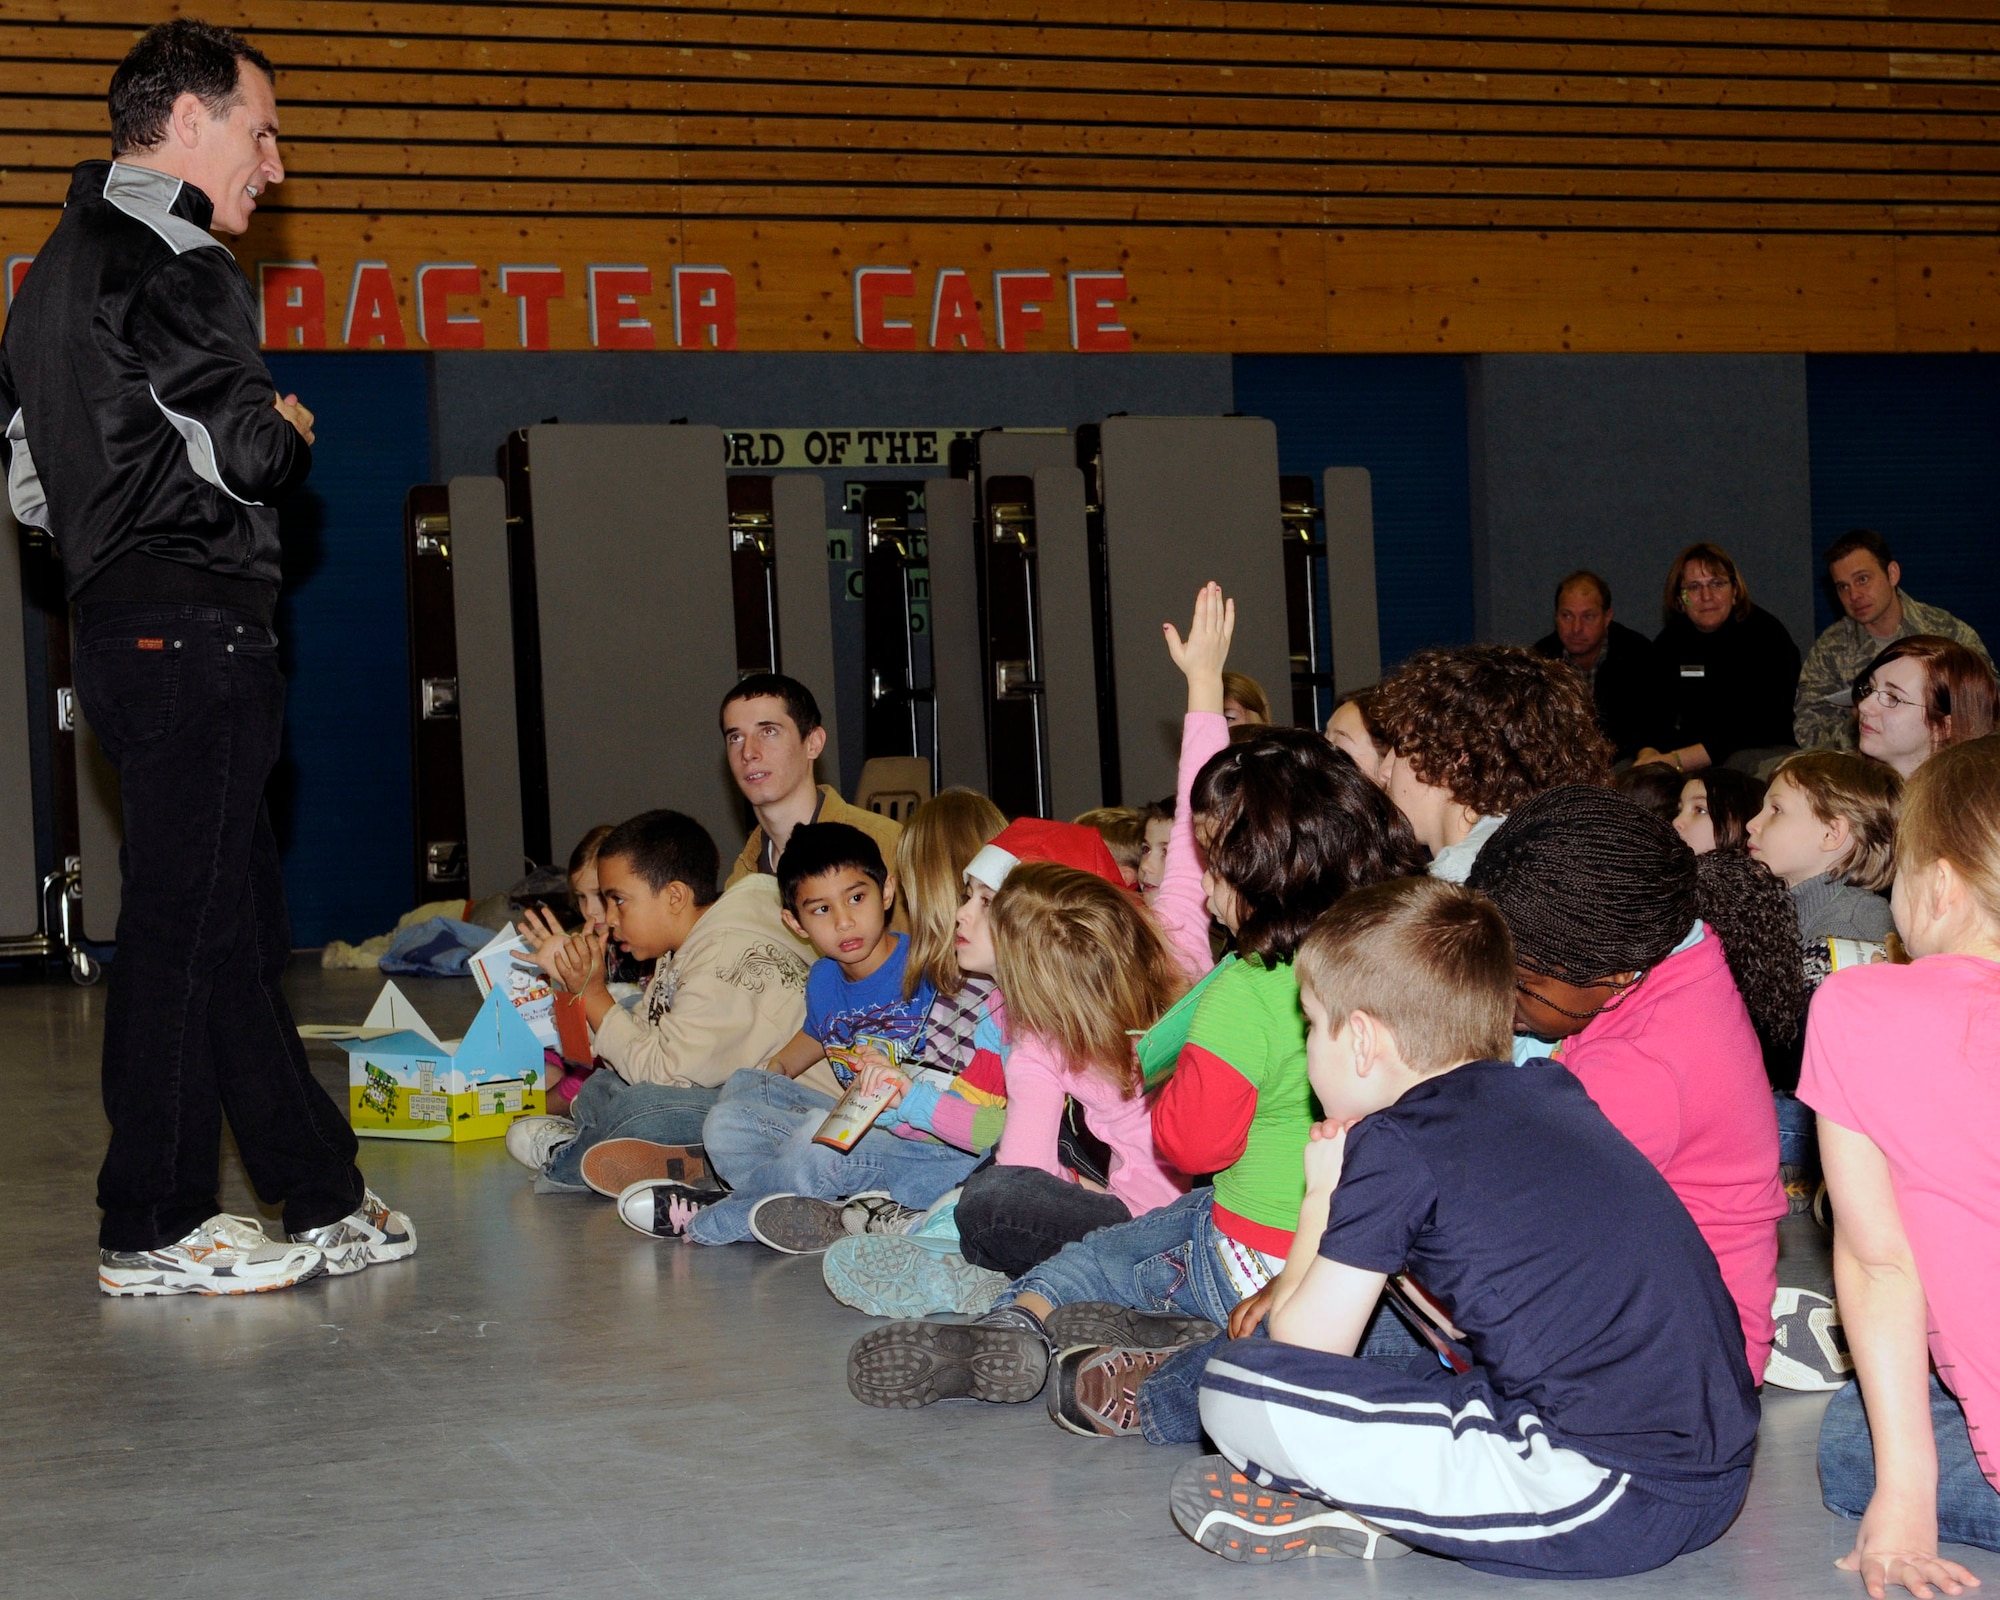 Mr. Trevor Romain, children's author and motivational speaker, answers questions from youth at Ramstein Elementary School, Ramstein Air Base, Germany, Dec. 17, 2009. Mr. Romain is the creator of the Air Force Family focused campaign, "Cuzzie the Bear” designed to comfort school-age children while their parents are deployed. (U.S. Air Force photo by Airman 1st Class Brea Miller)